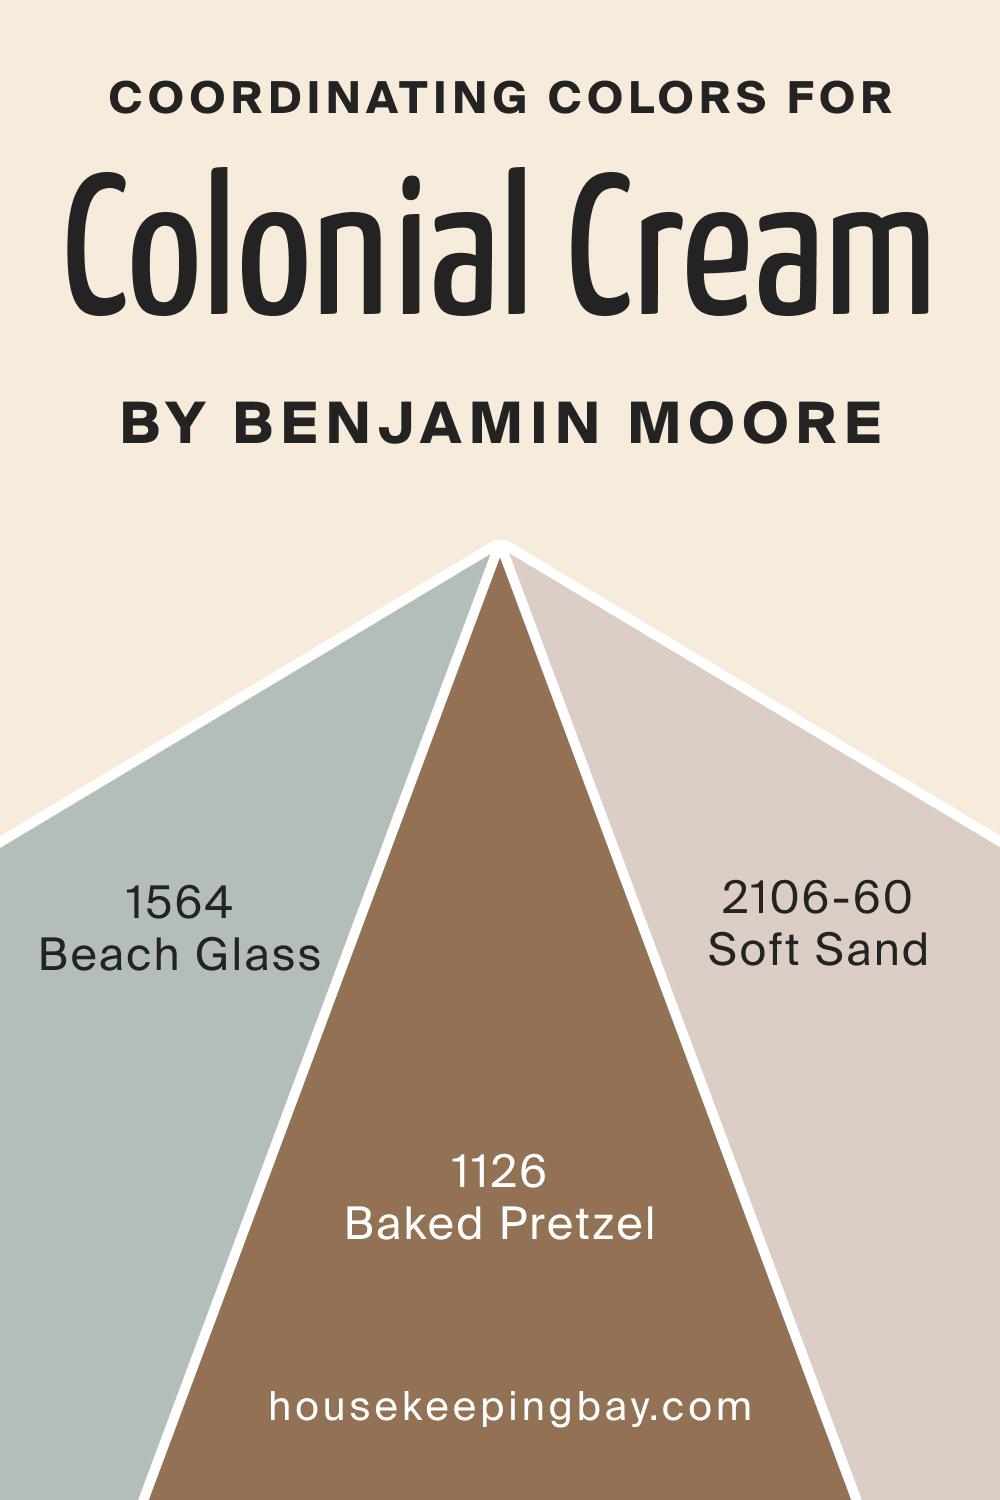 Coordinating Colors for Colonial Cream OC 77 by Benjamin Moore